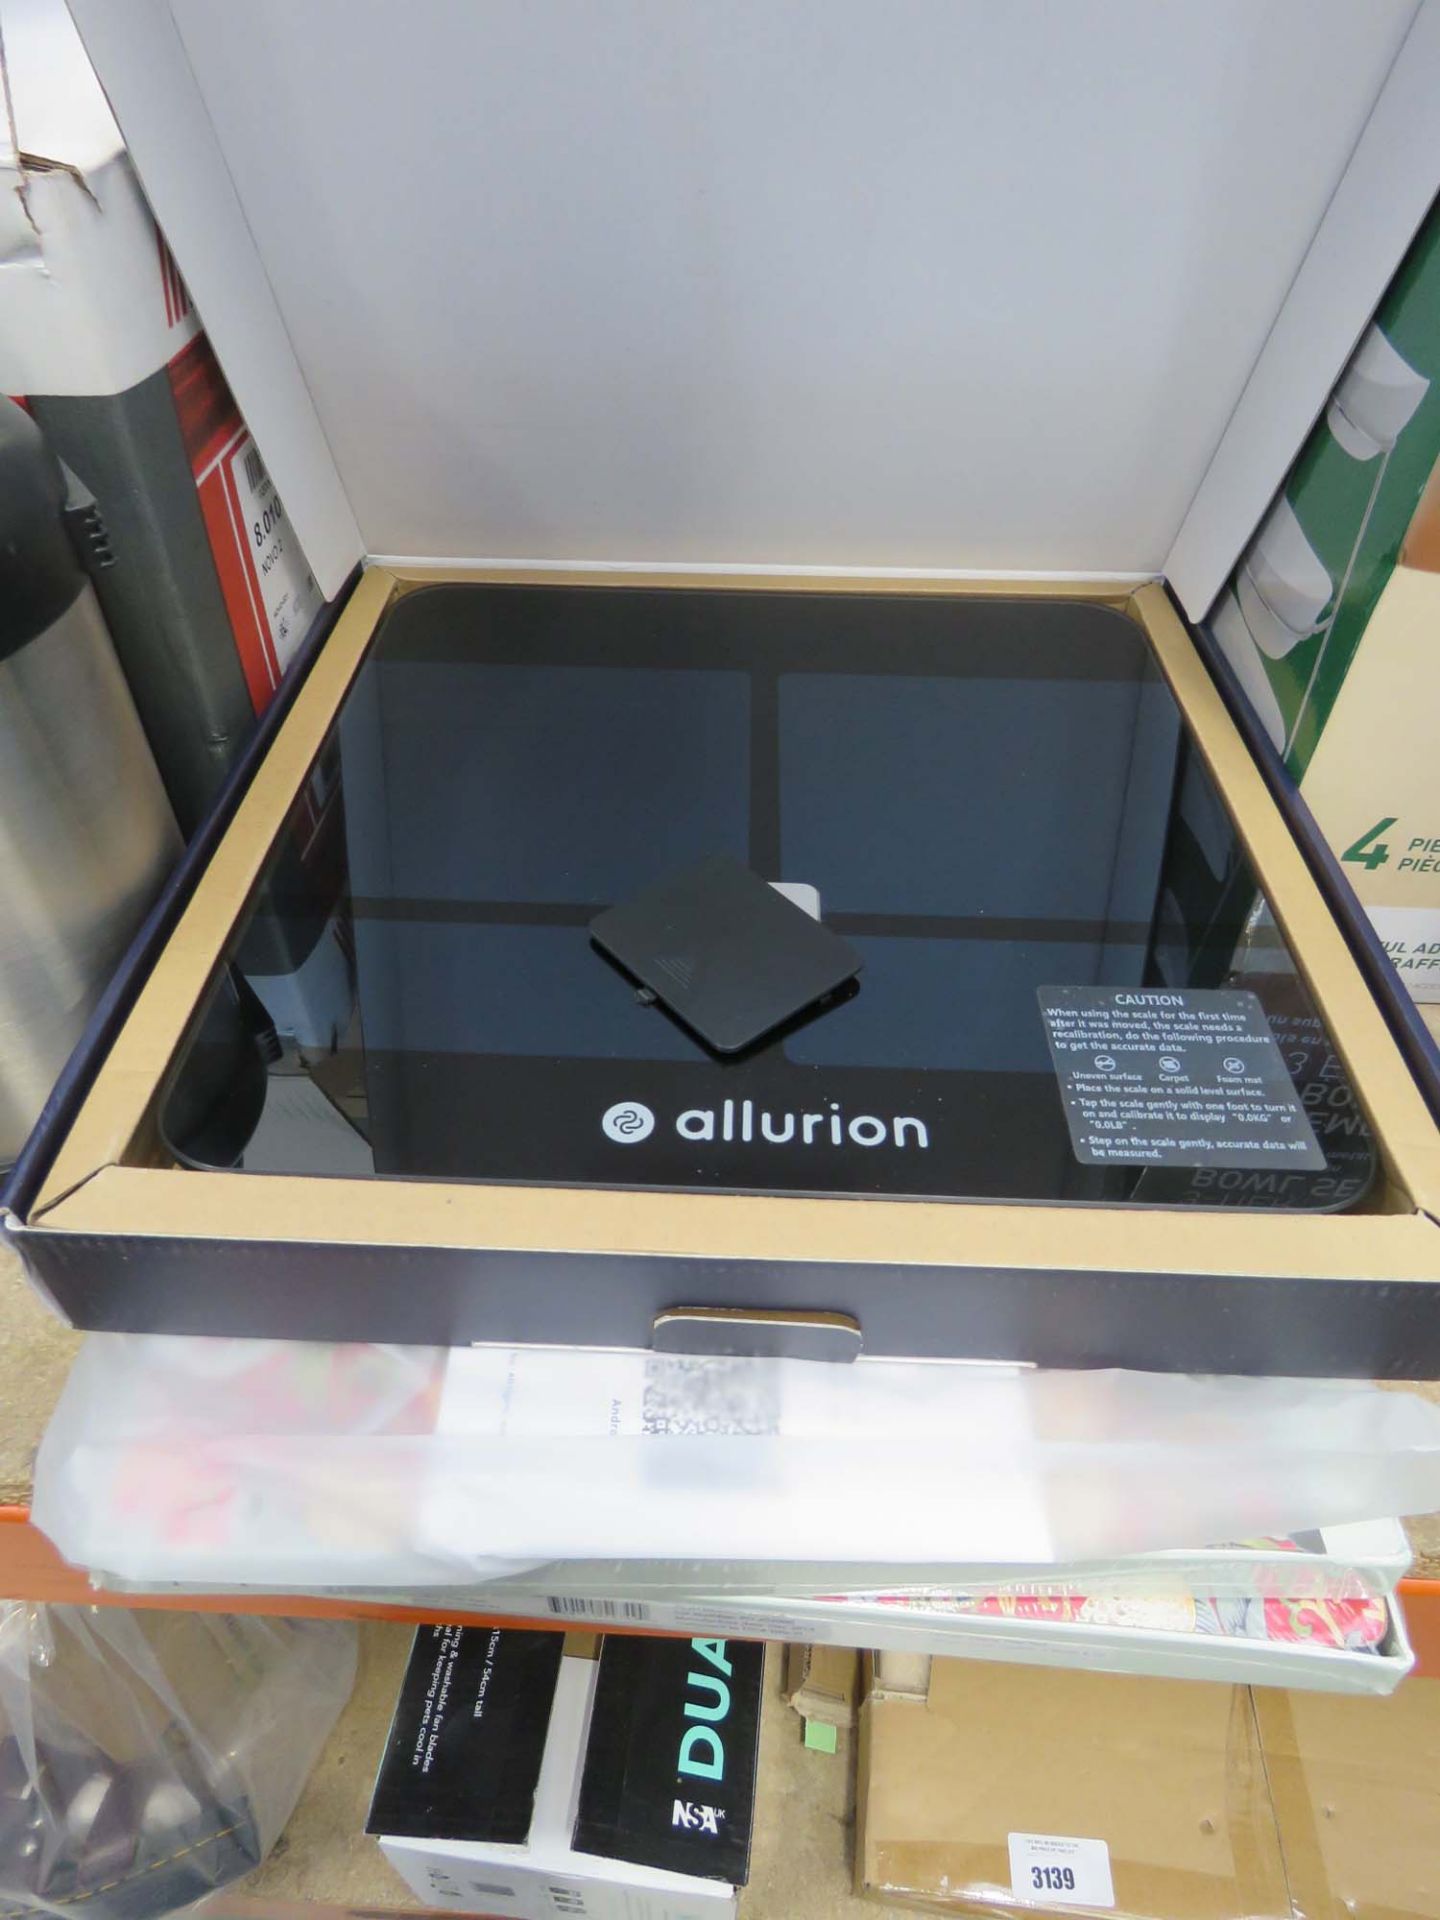 Allurion connected weighing scale